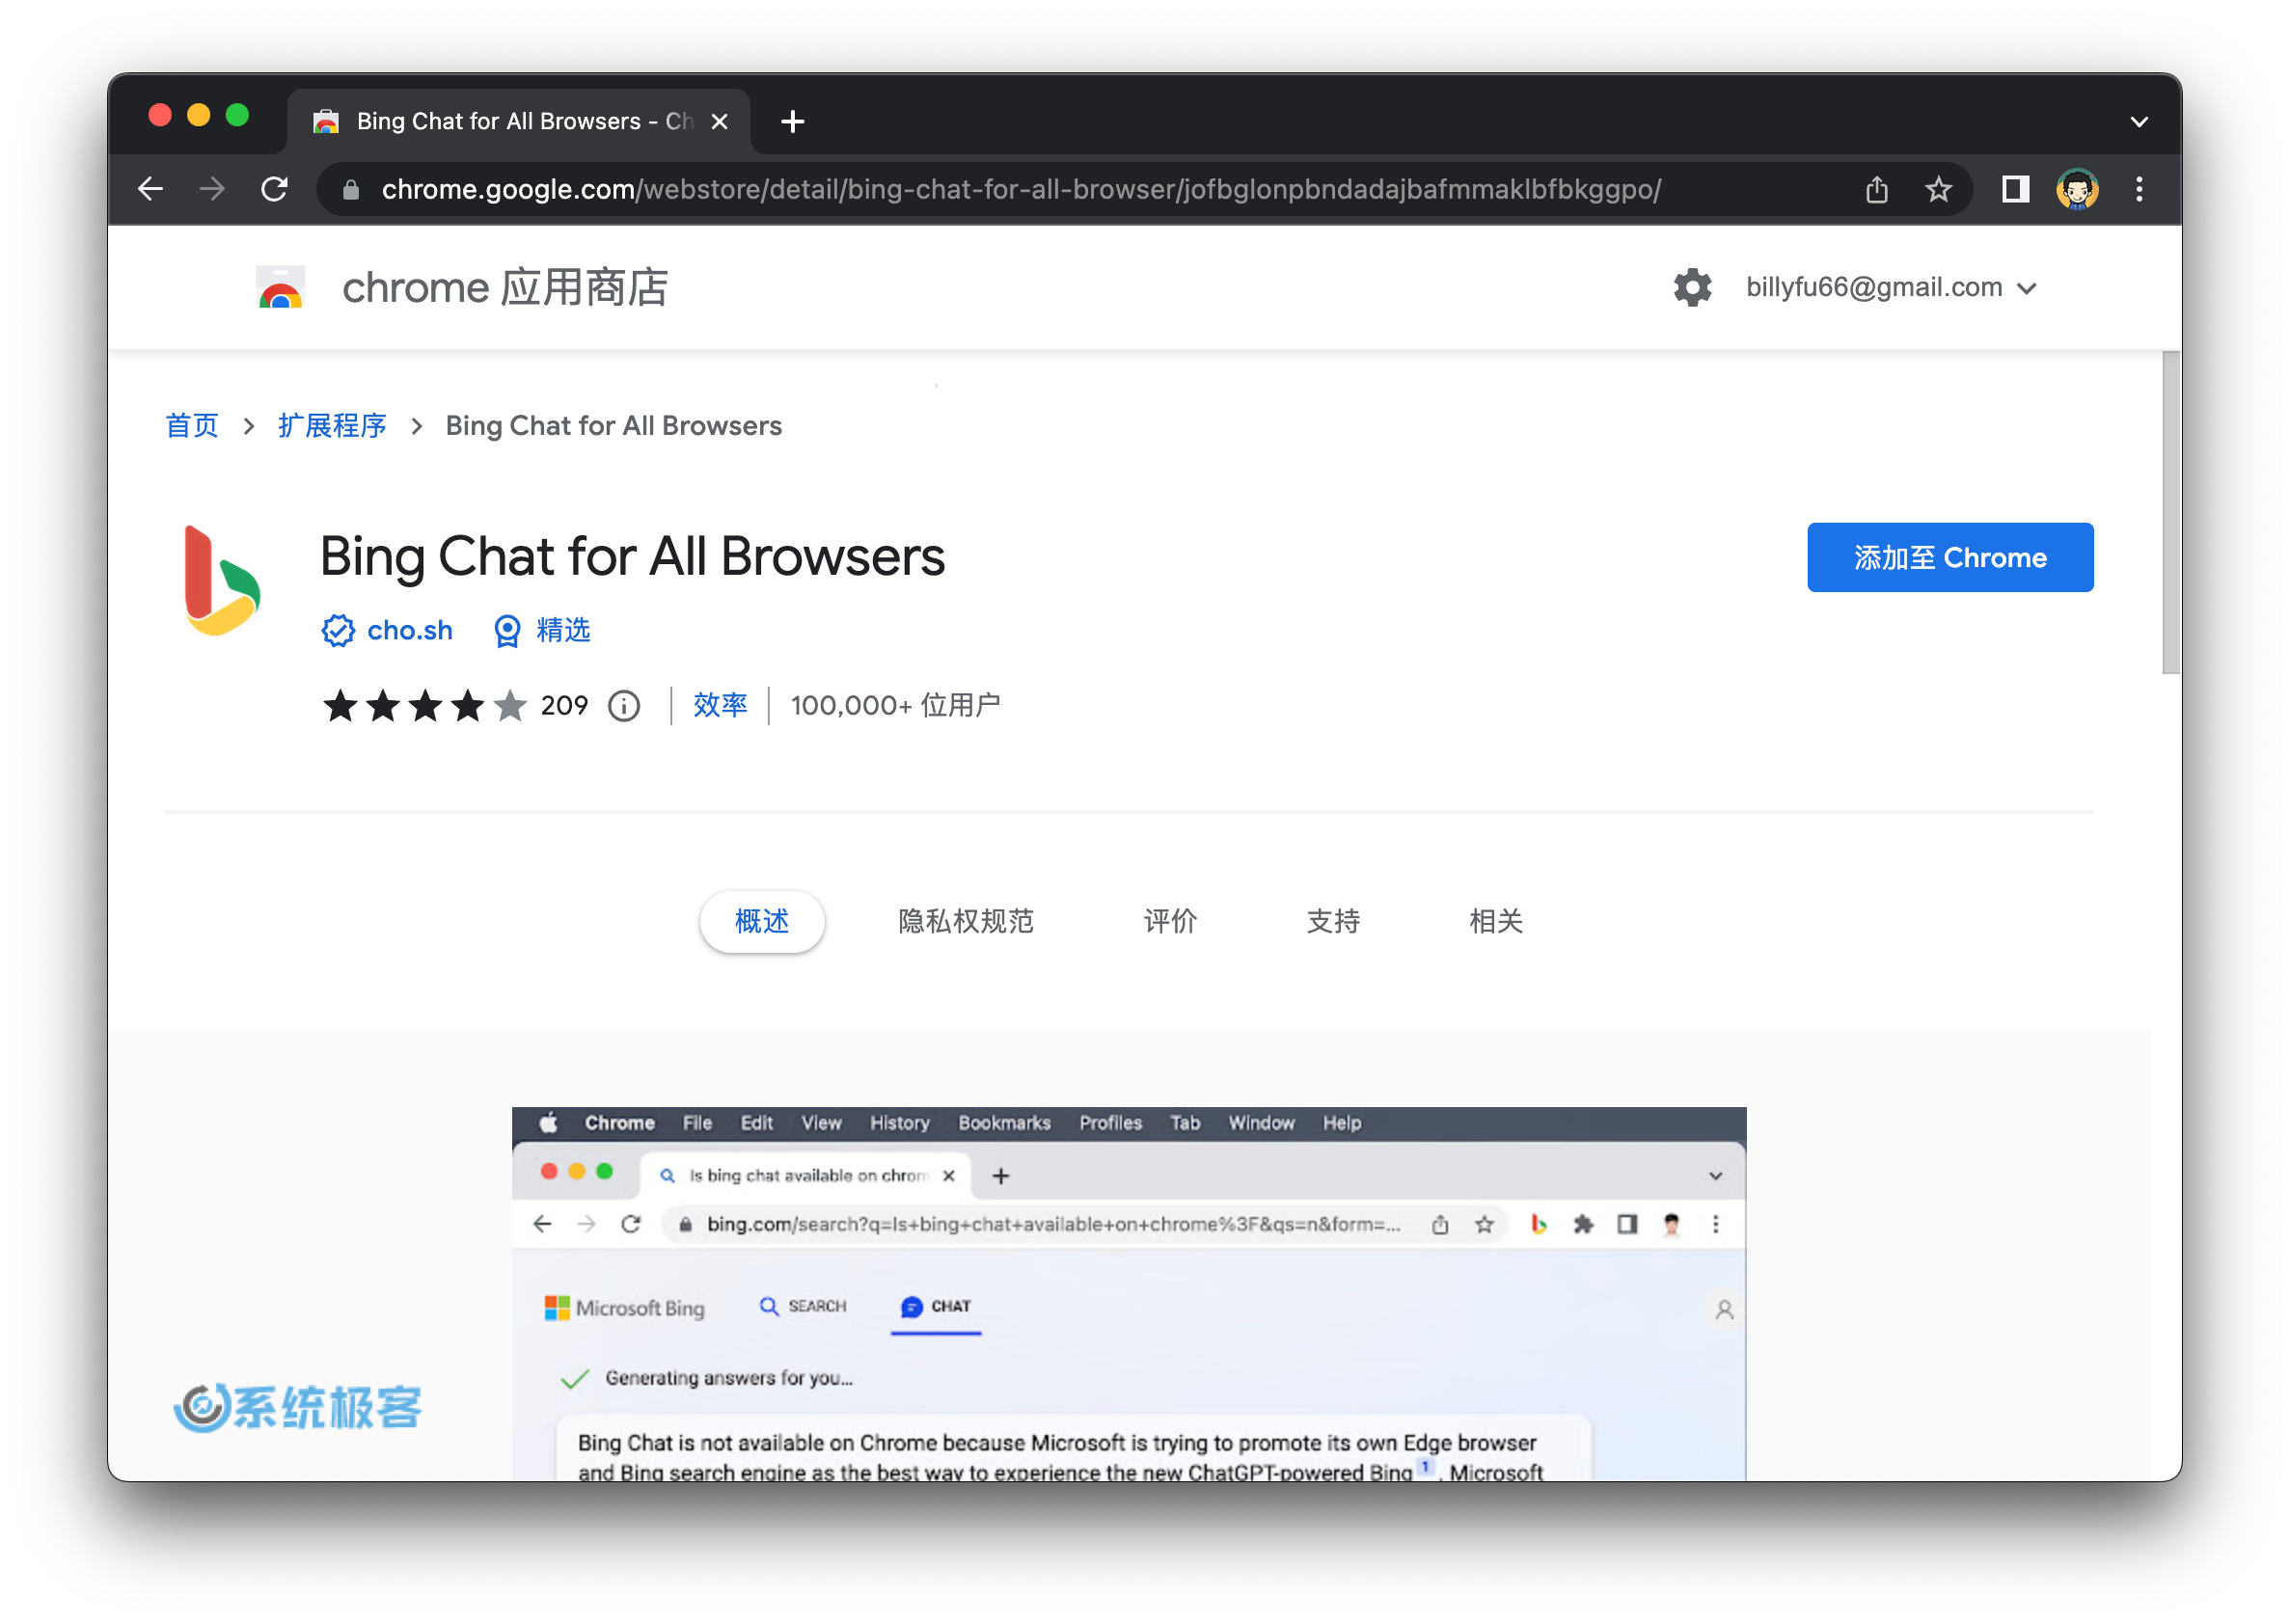 Bing Chat for All Browsers